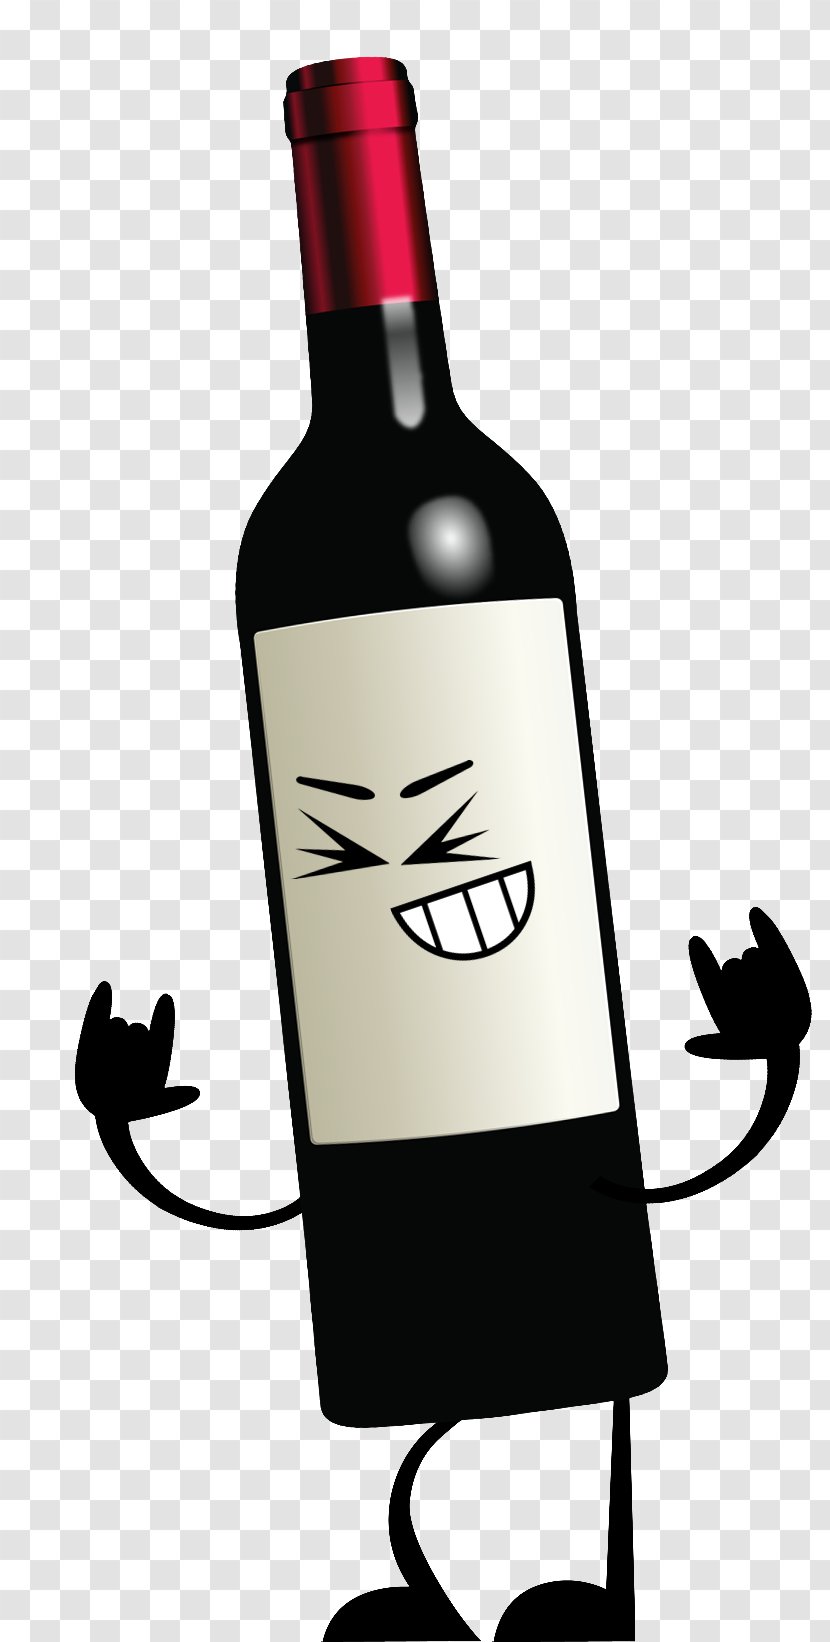 Red Wine Glass Bottle Transparent PNG